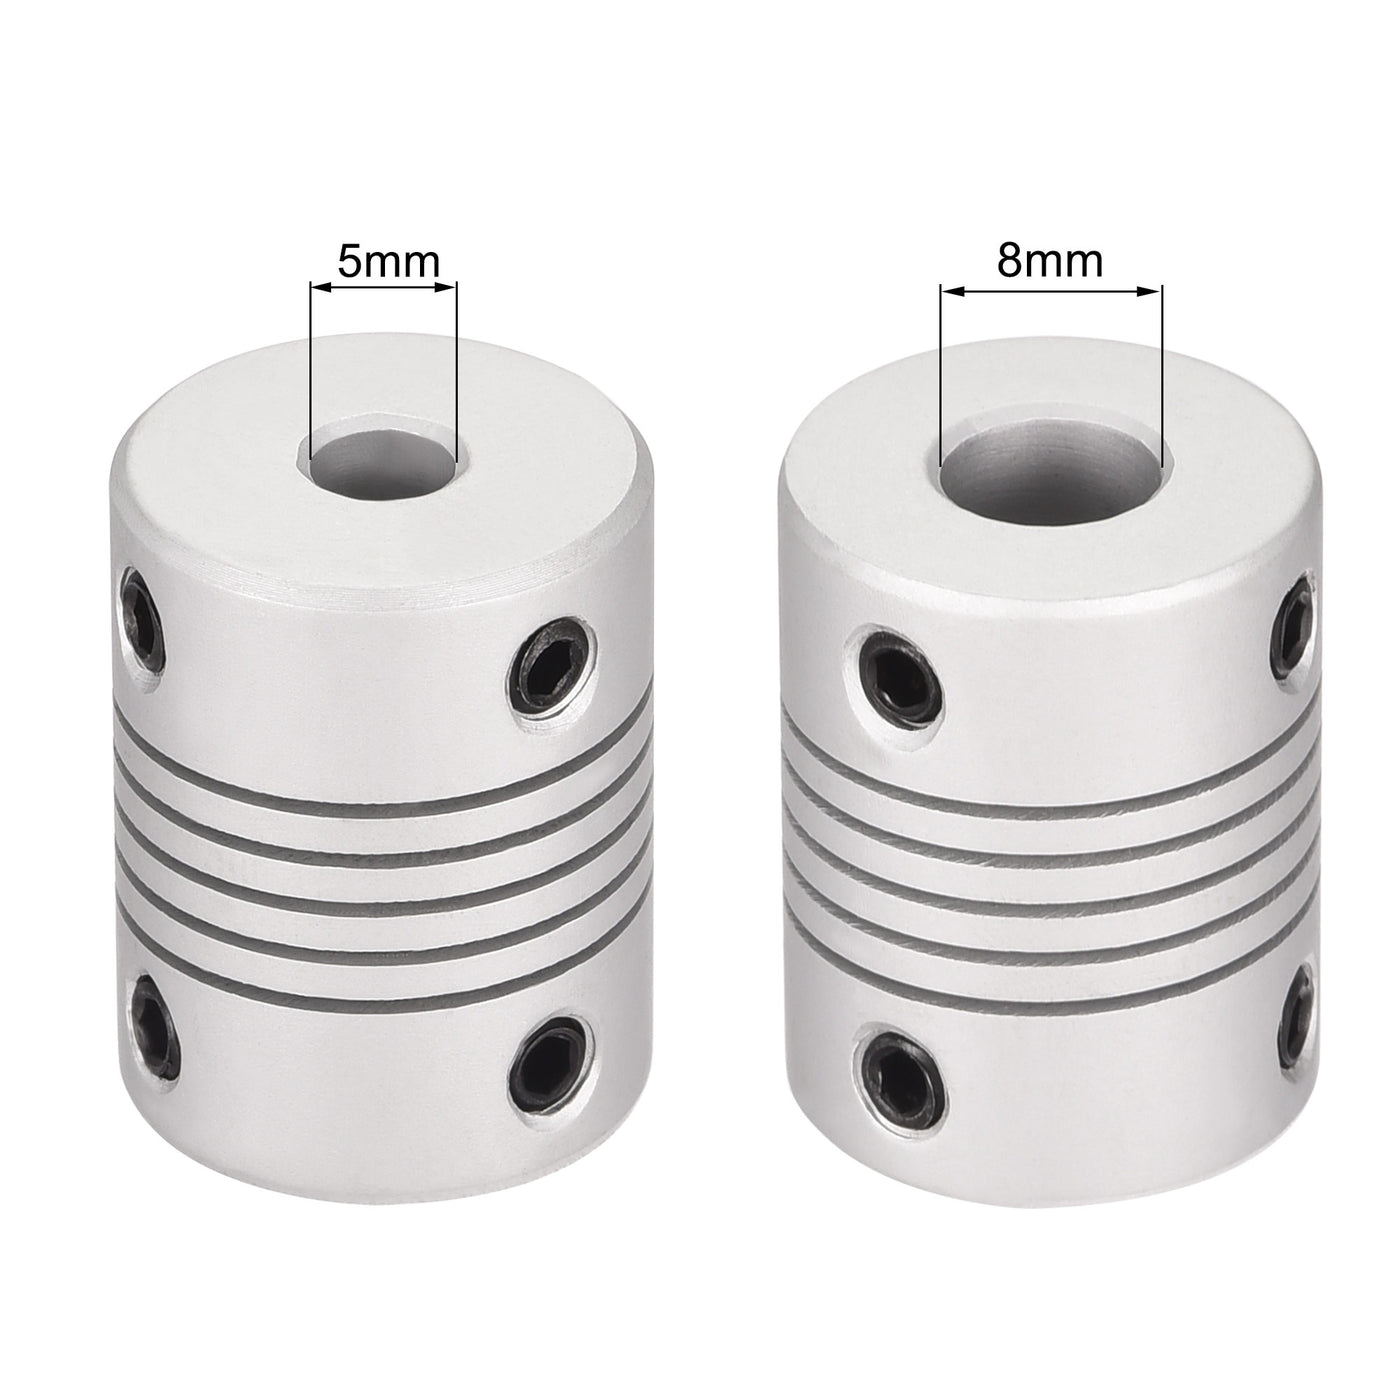 uxcell Uxcell 5mm to 8mm Aluminum Alloy Shaft Coupling Flexible Coupler L25xD19 Silver,5pcs